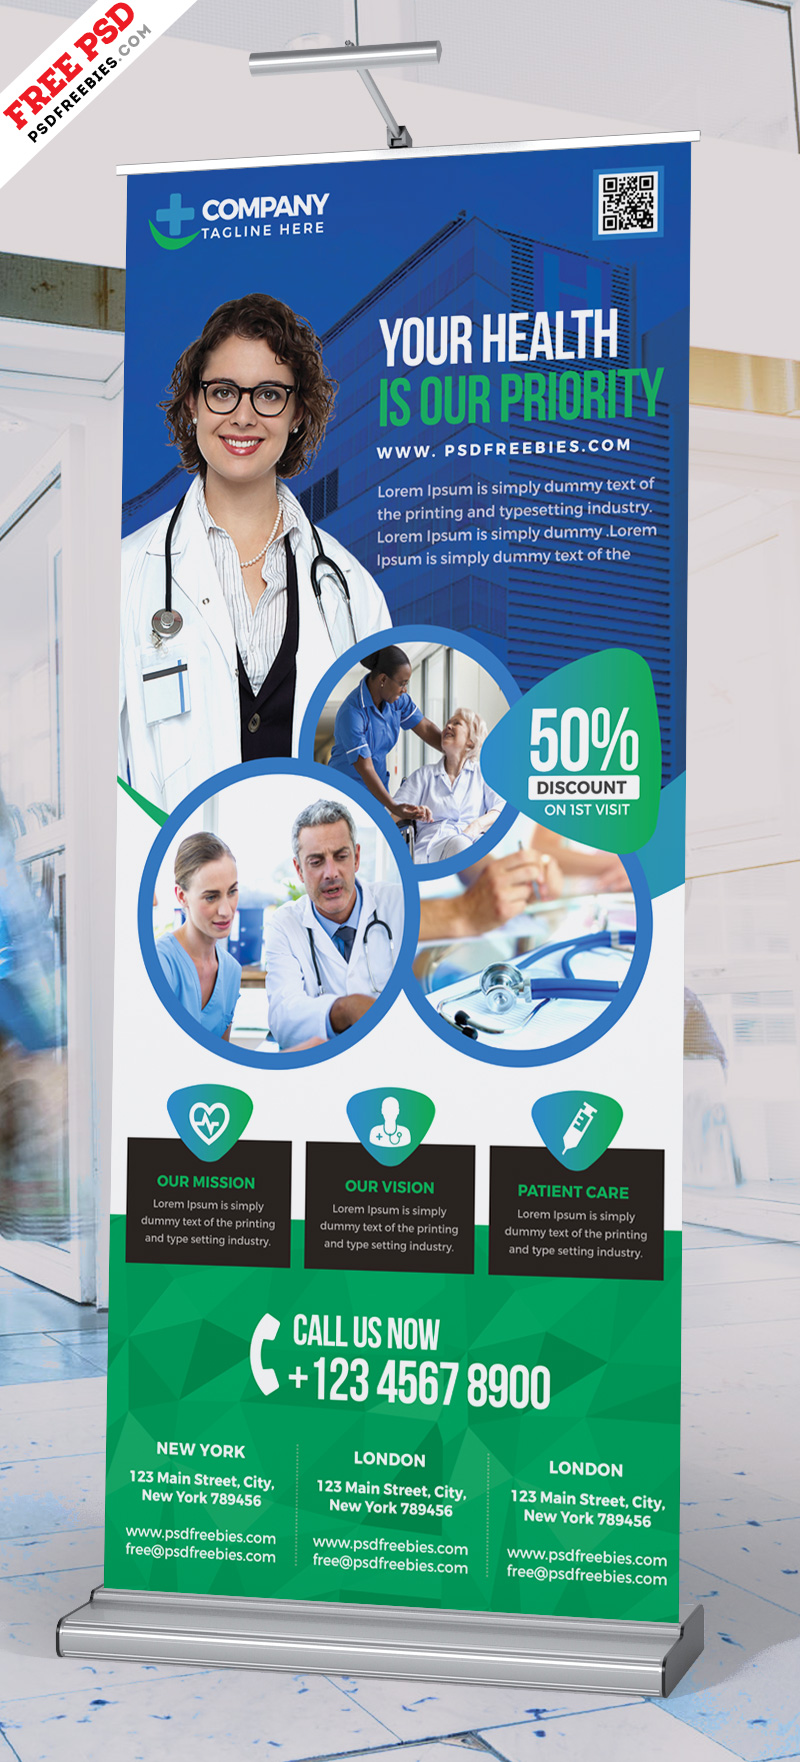 Hospital and Pharmacy Roll-up Banner PSD Free Download